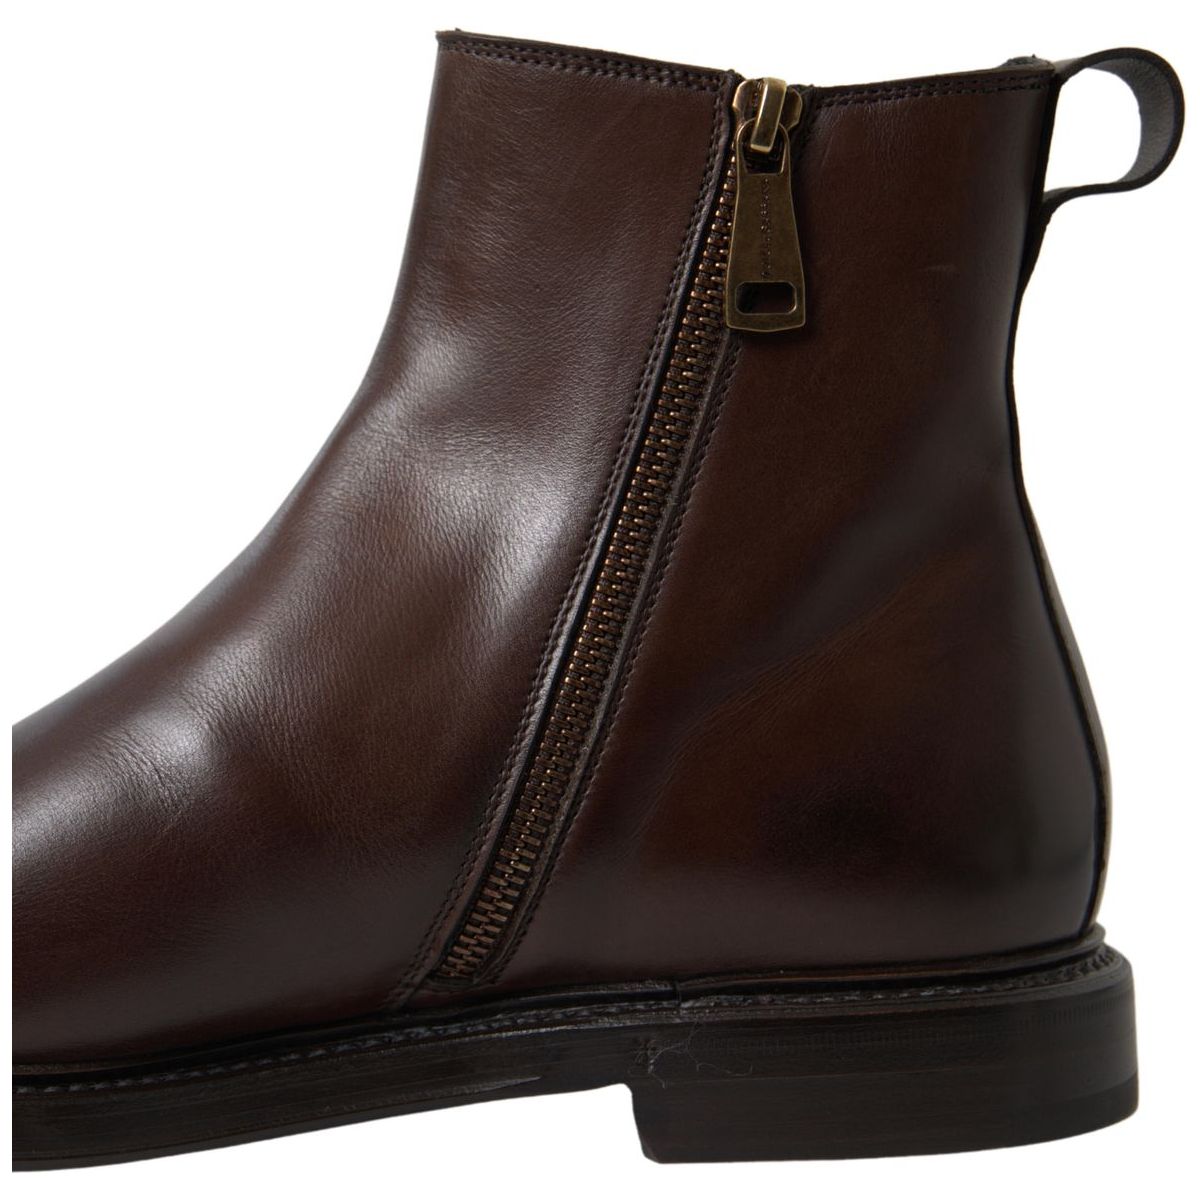 Dolce & Gabbana Elegant Leather Chelsea Boots brown-leather-chelsea-mens-boots-shoes